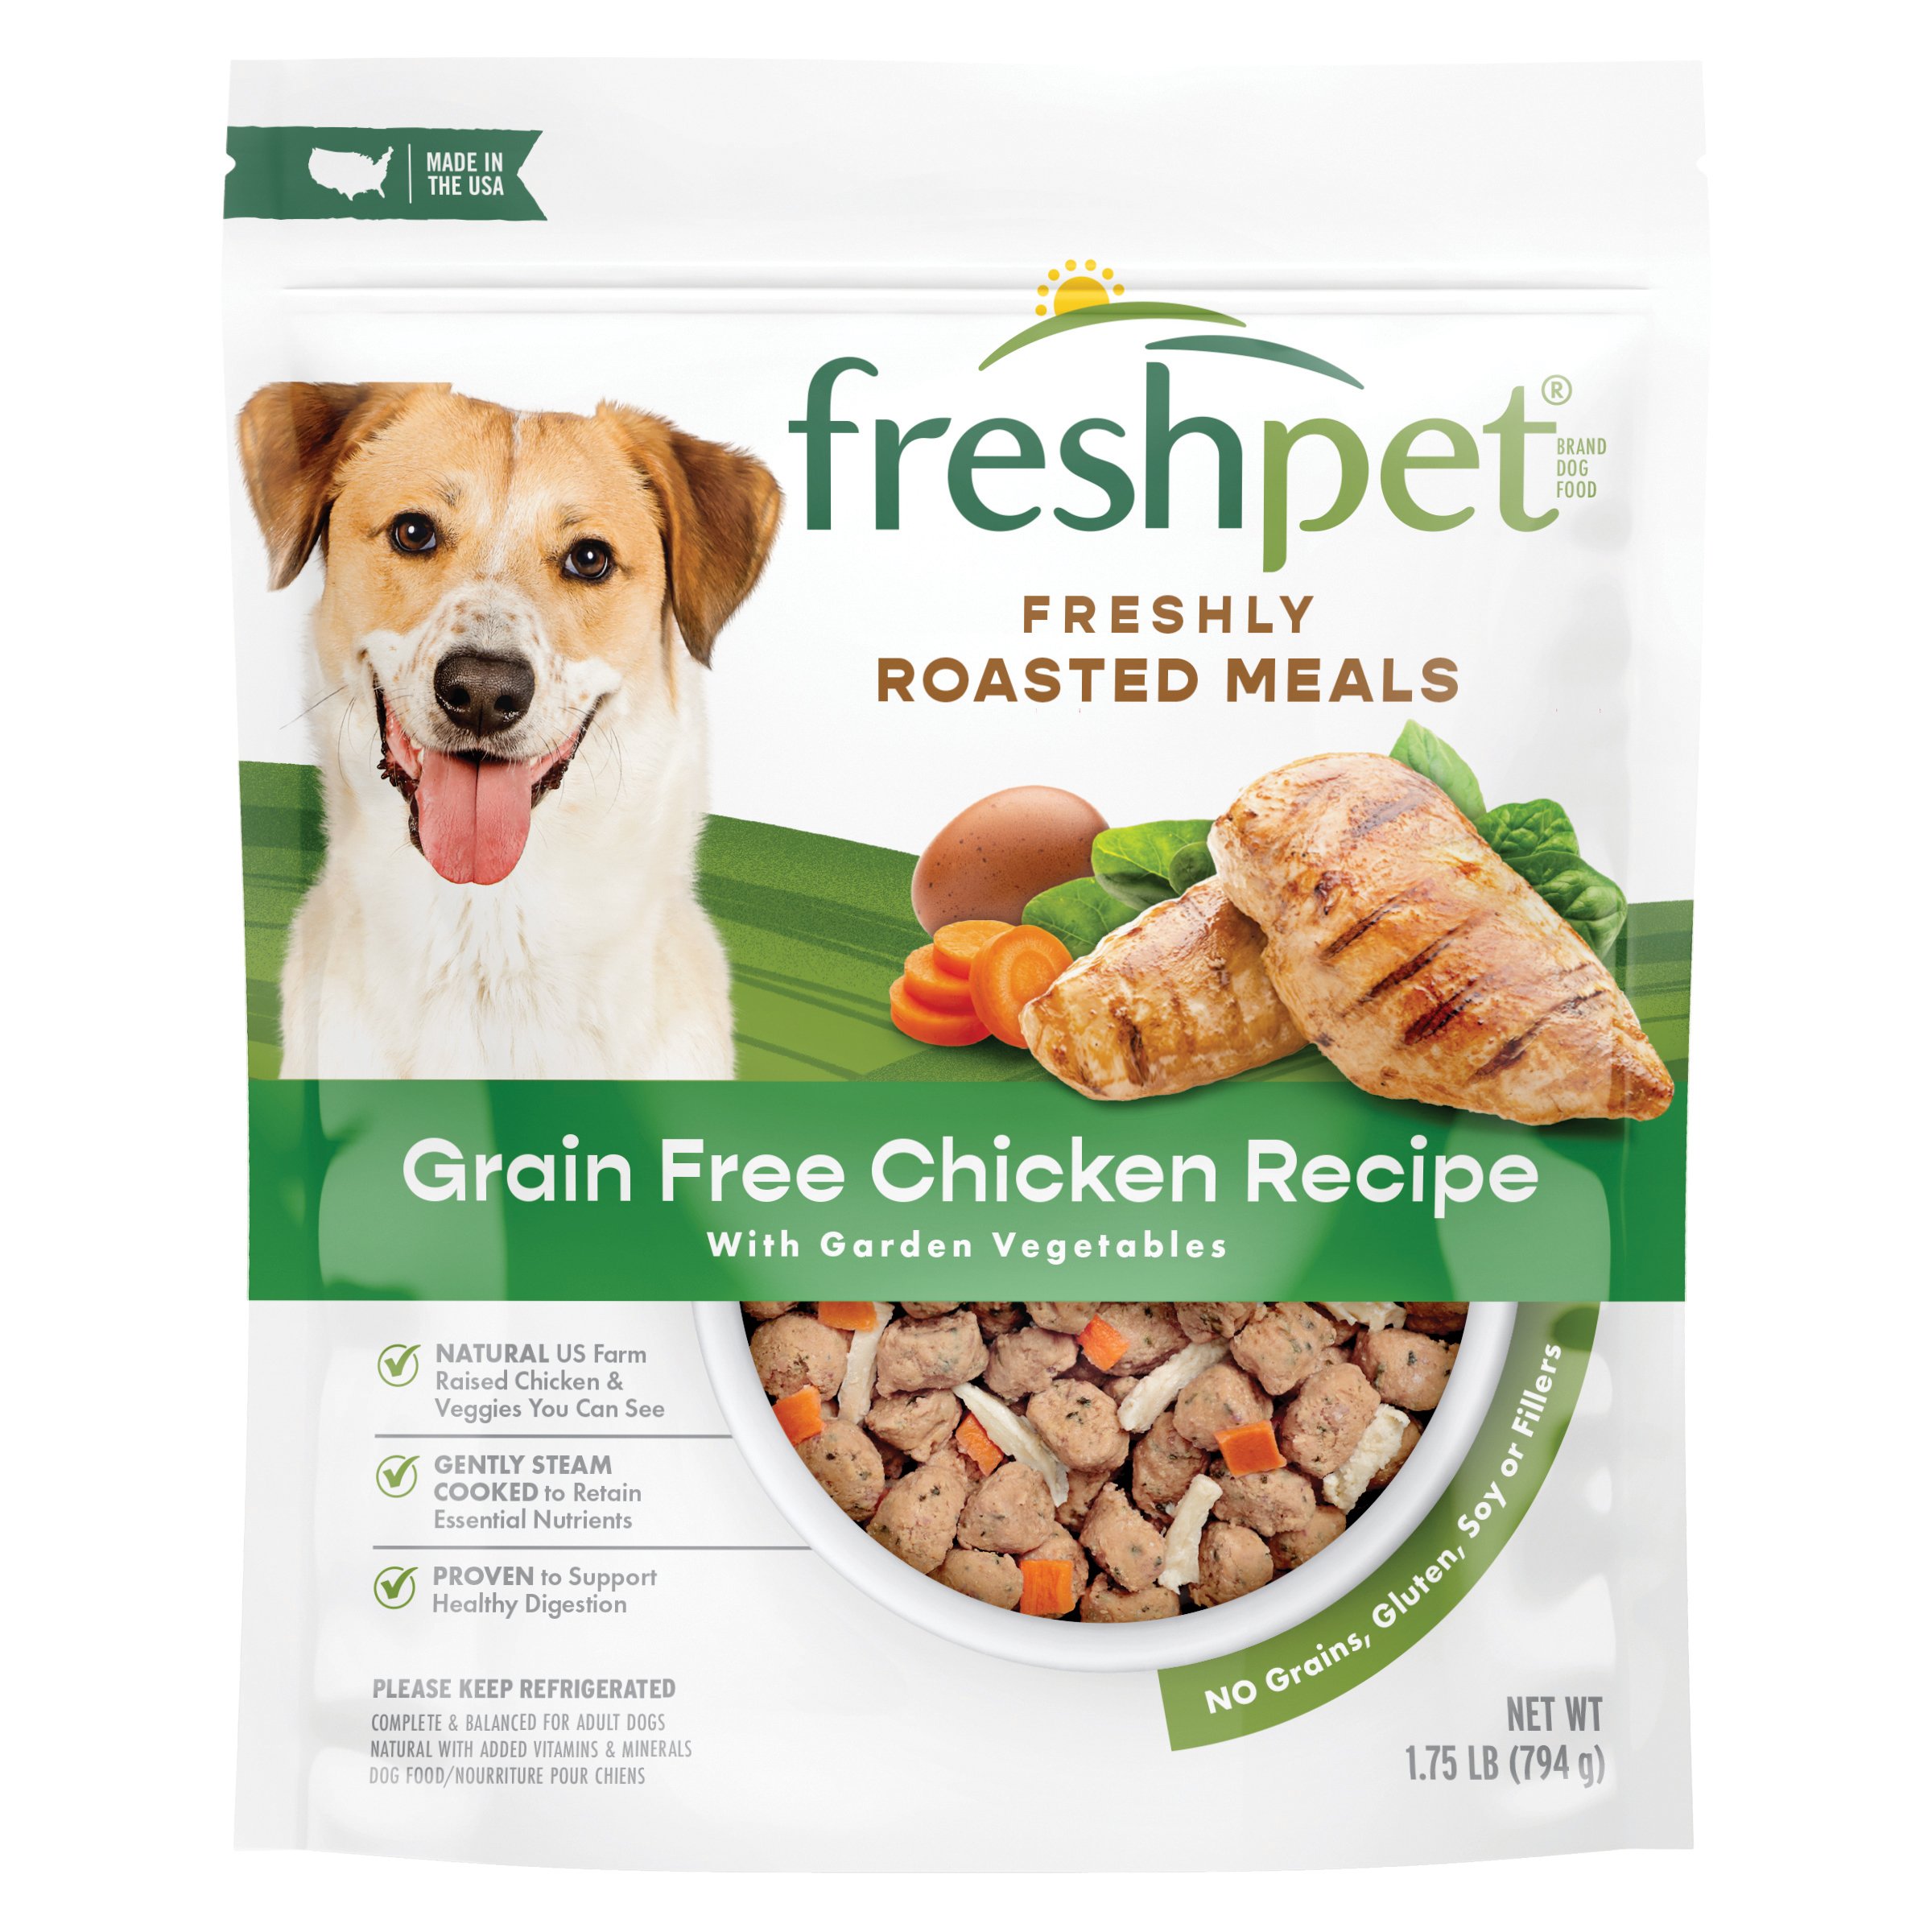 freshpet for small dogs